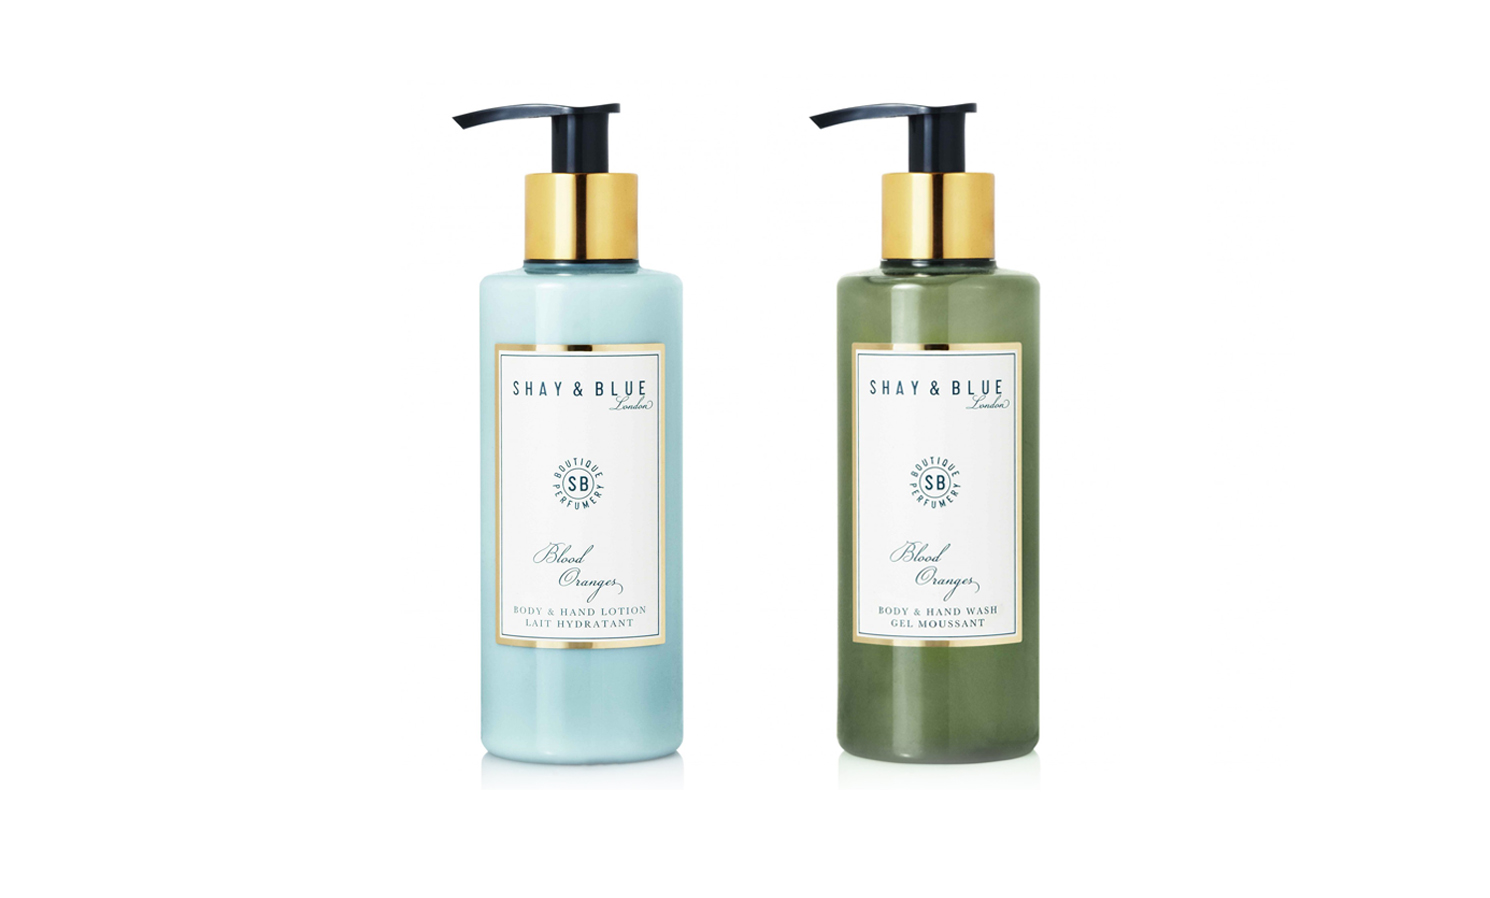 Shay & Blue Hand Wash and Lotion Product Label Design 2